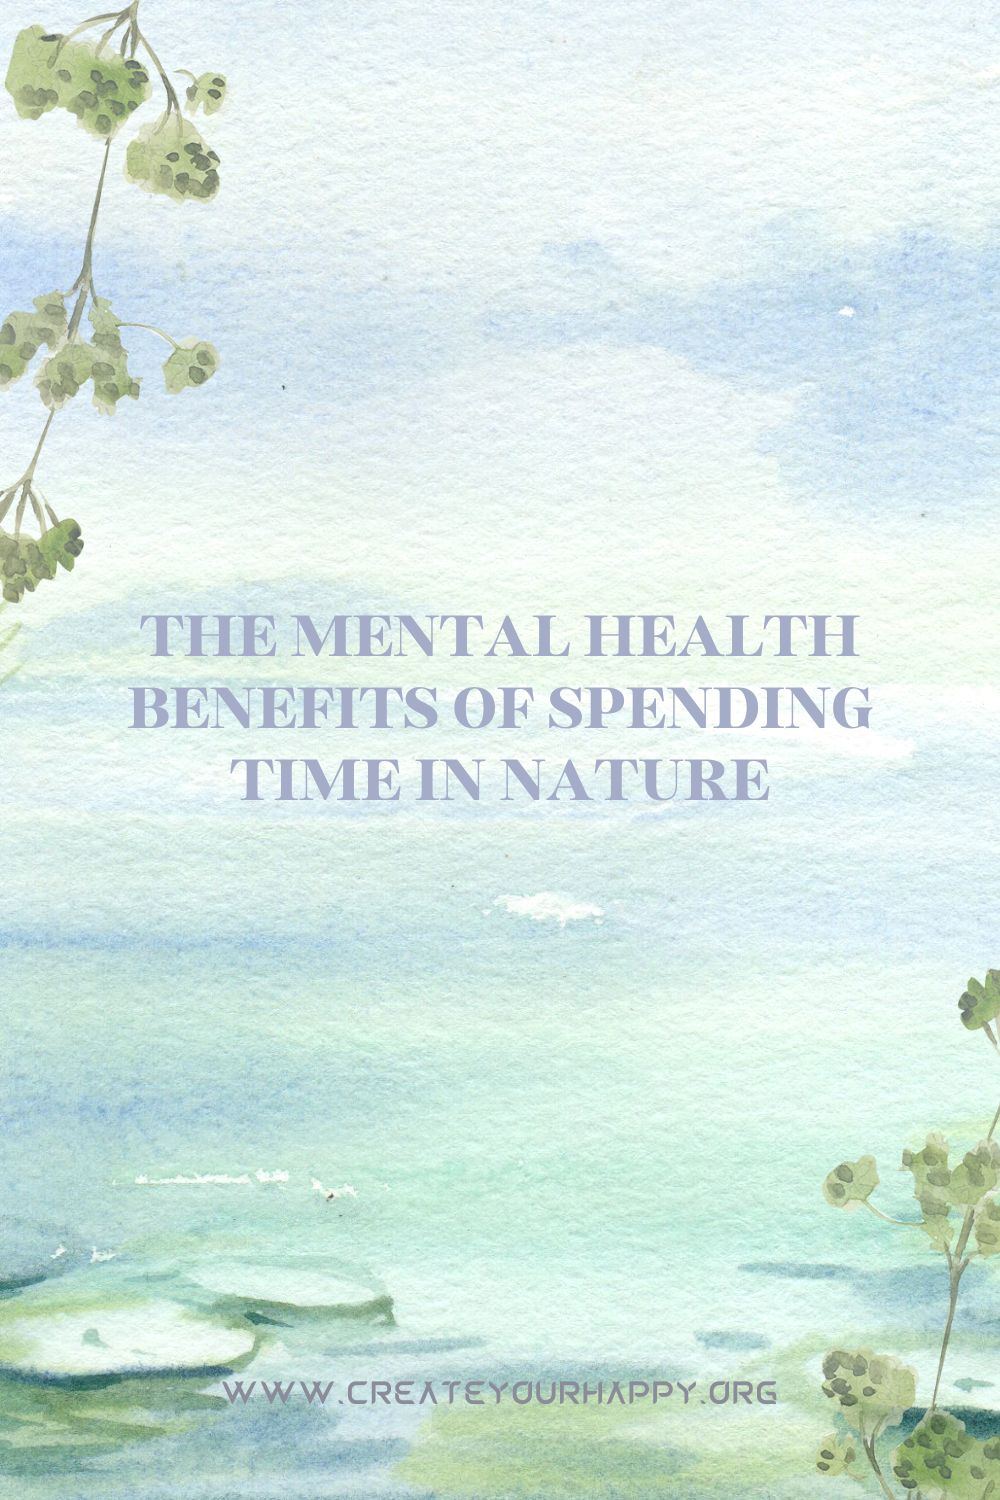 The Mental Health Benefits of Spending Time in Nature